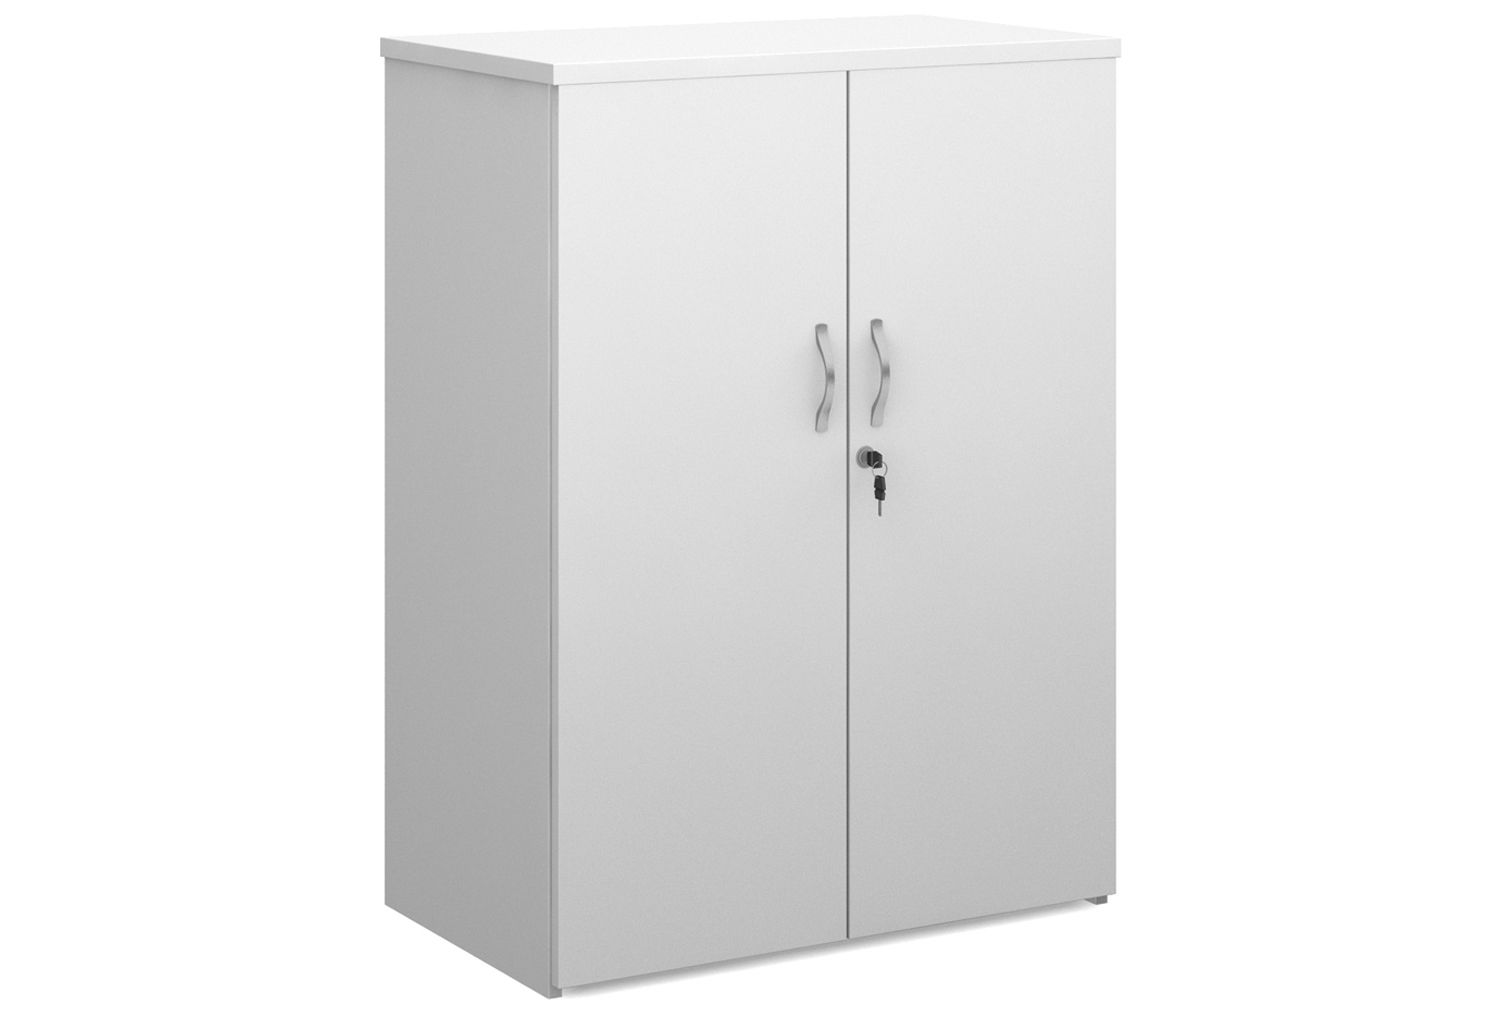 Tandem Double Door Office Cupboard, 2 Shelf - 80wx47dx109h (cm), White, Express Delivery